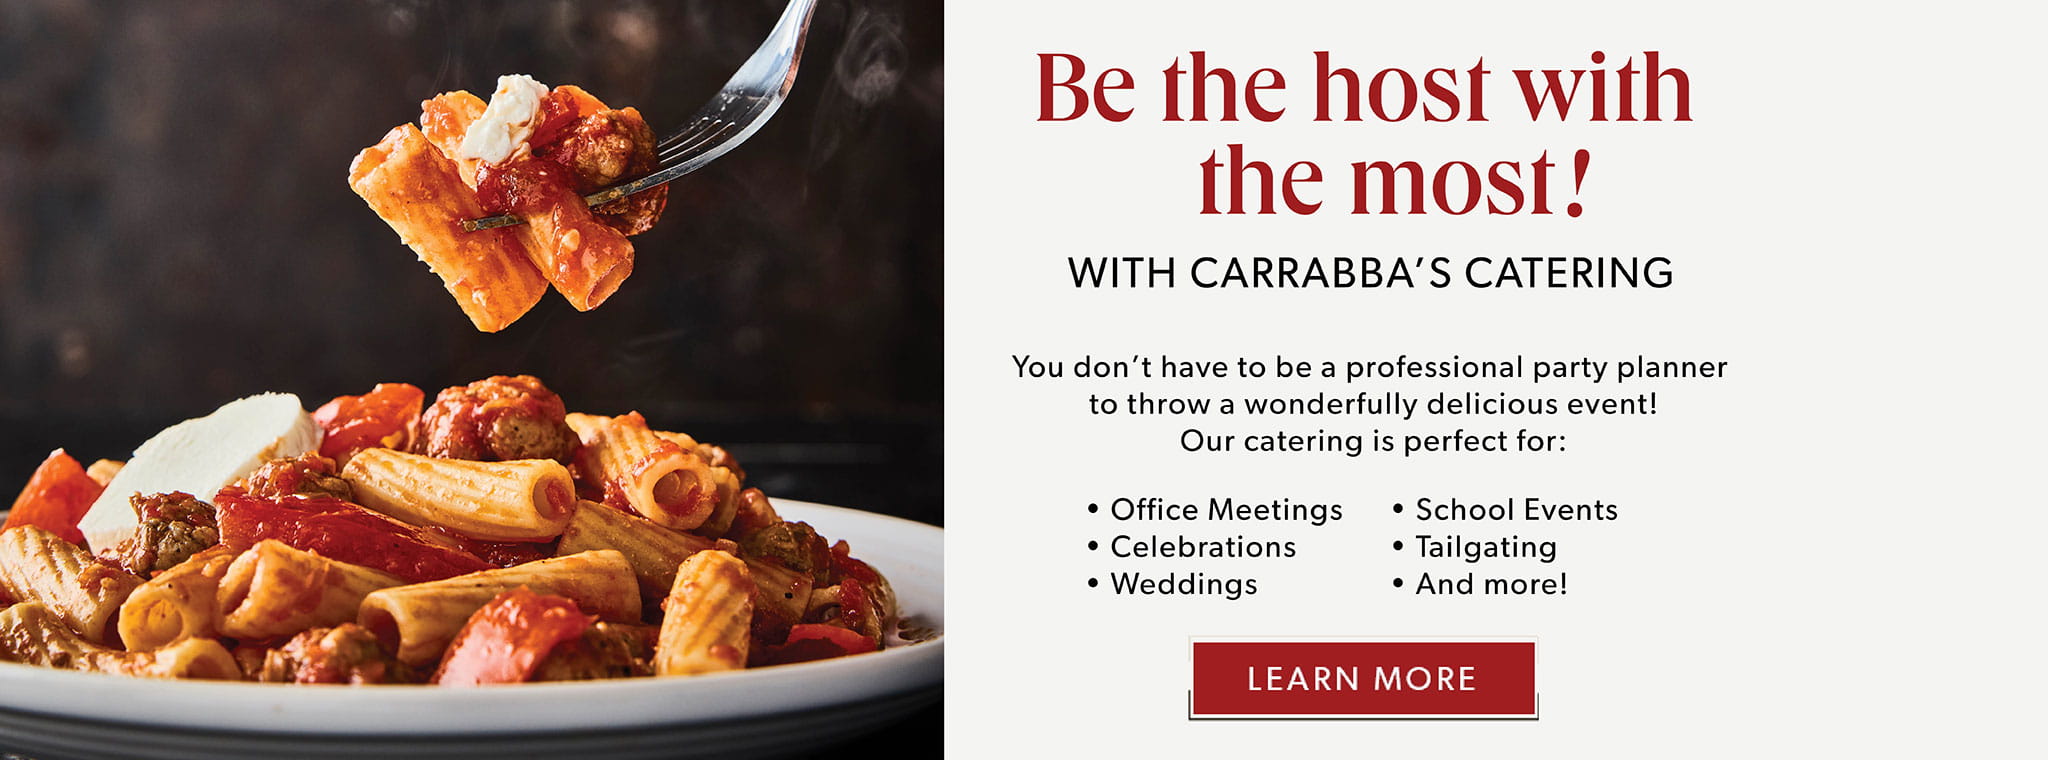 Be the host with the most with Carrabba’s Catering - Our catering is perfect for office meetings, school events, celebrations, tailgating, weddings and more!